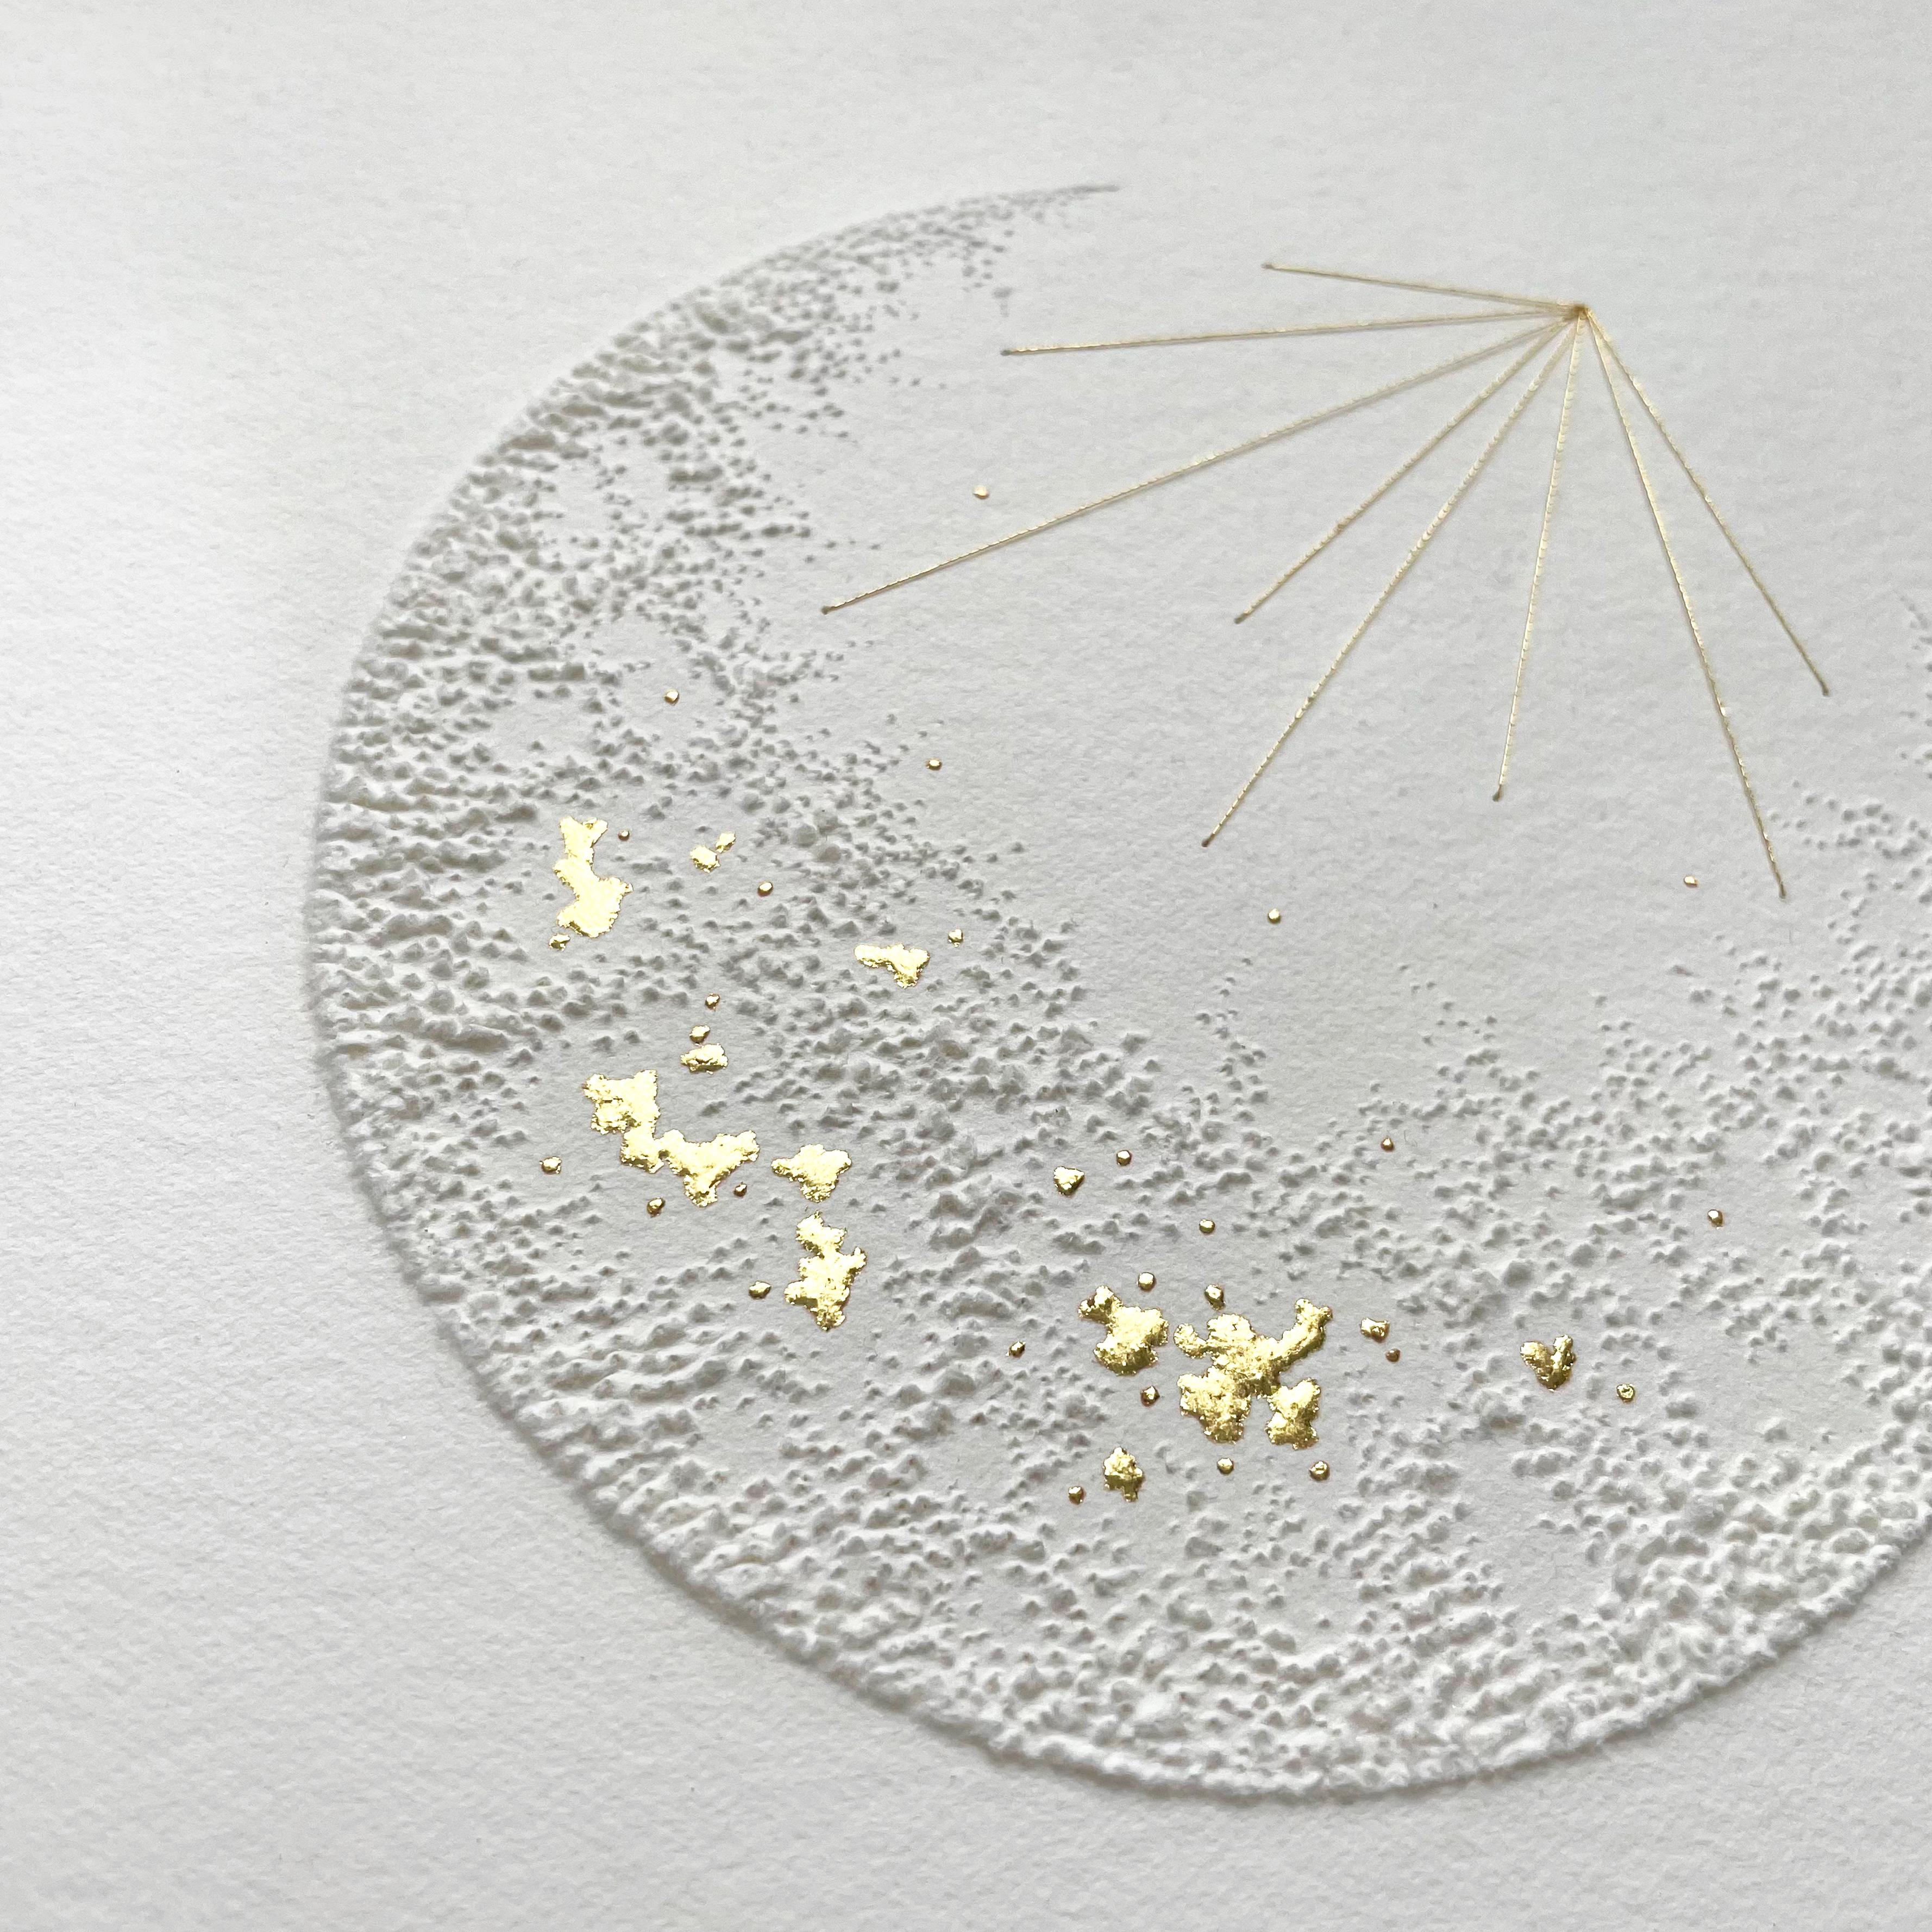 Moon 2- white 3D abstract circle with gold leaves. thread and pulled paper fiber - Art by Antonin Anzil